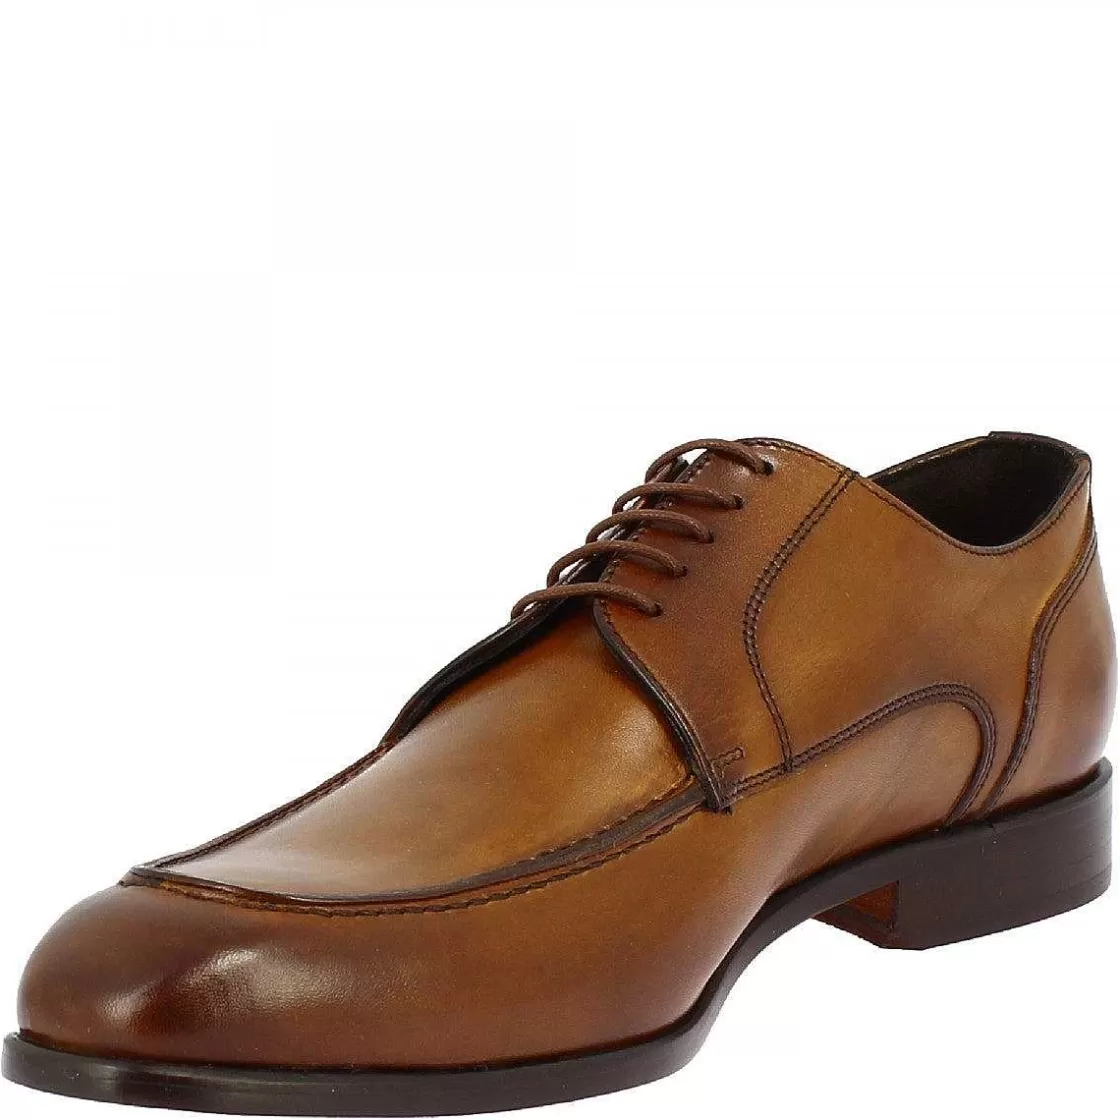 Leonardo Men'S Handmade Lace-Up Shoes In Brown Calf Leather Clearance